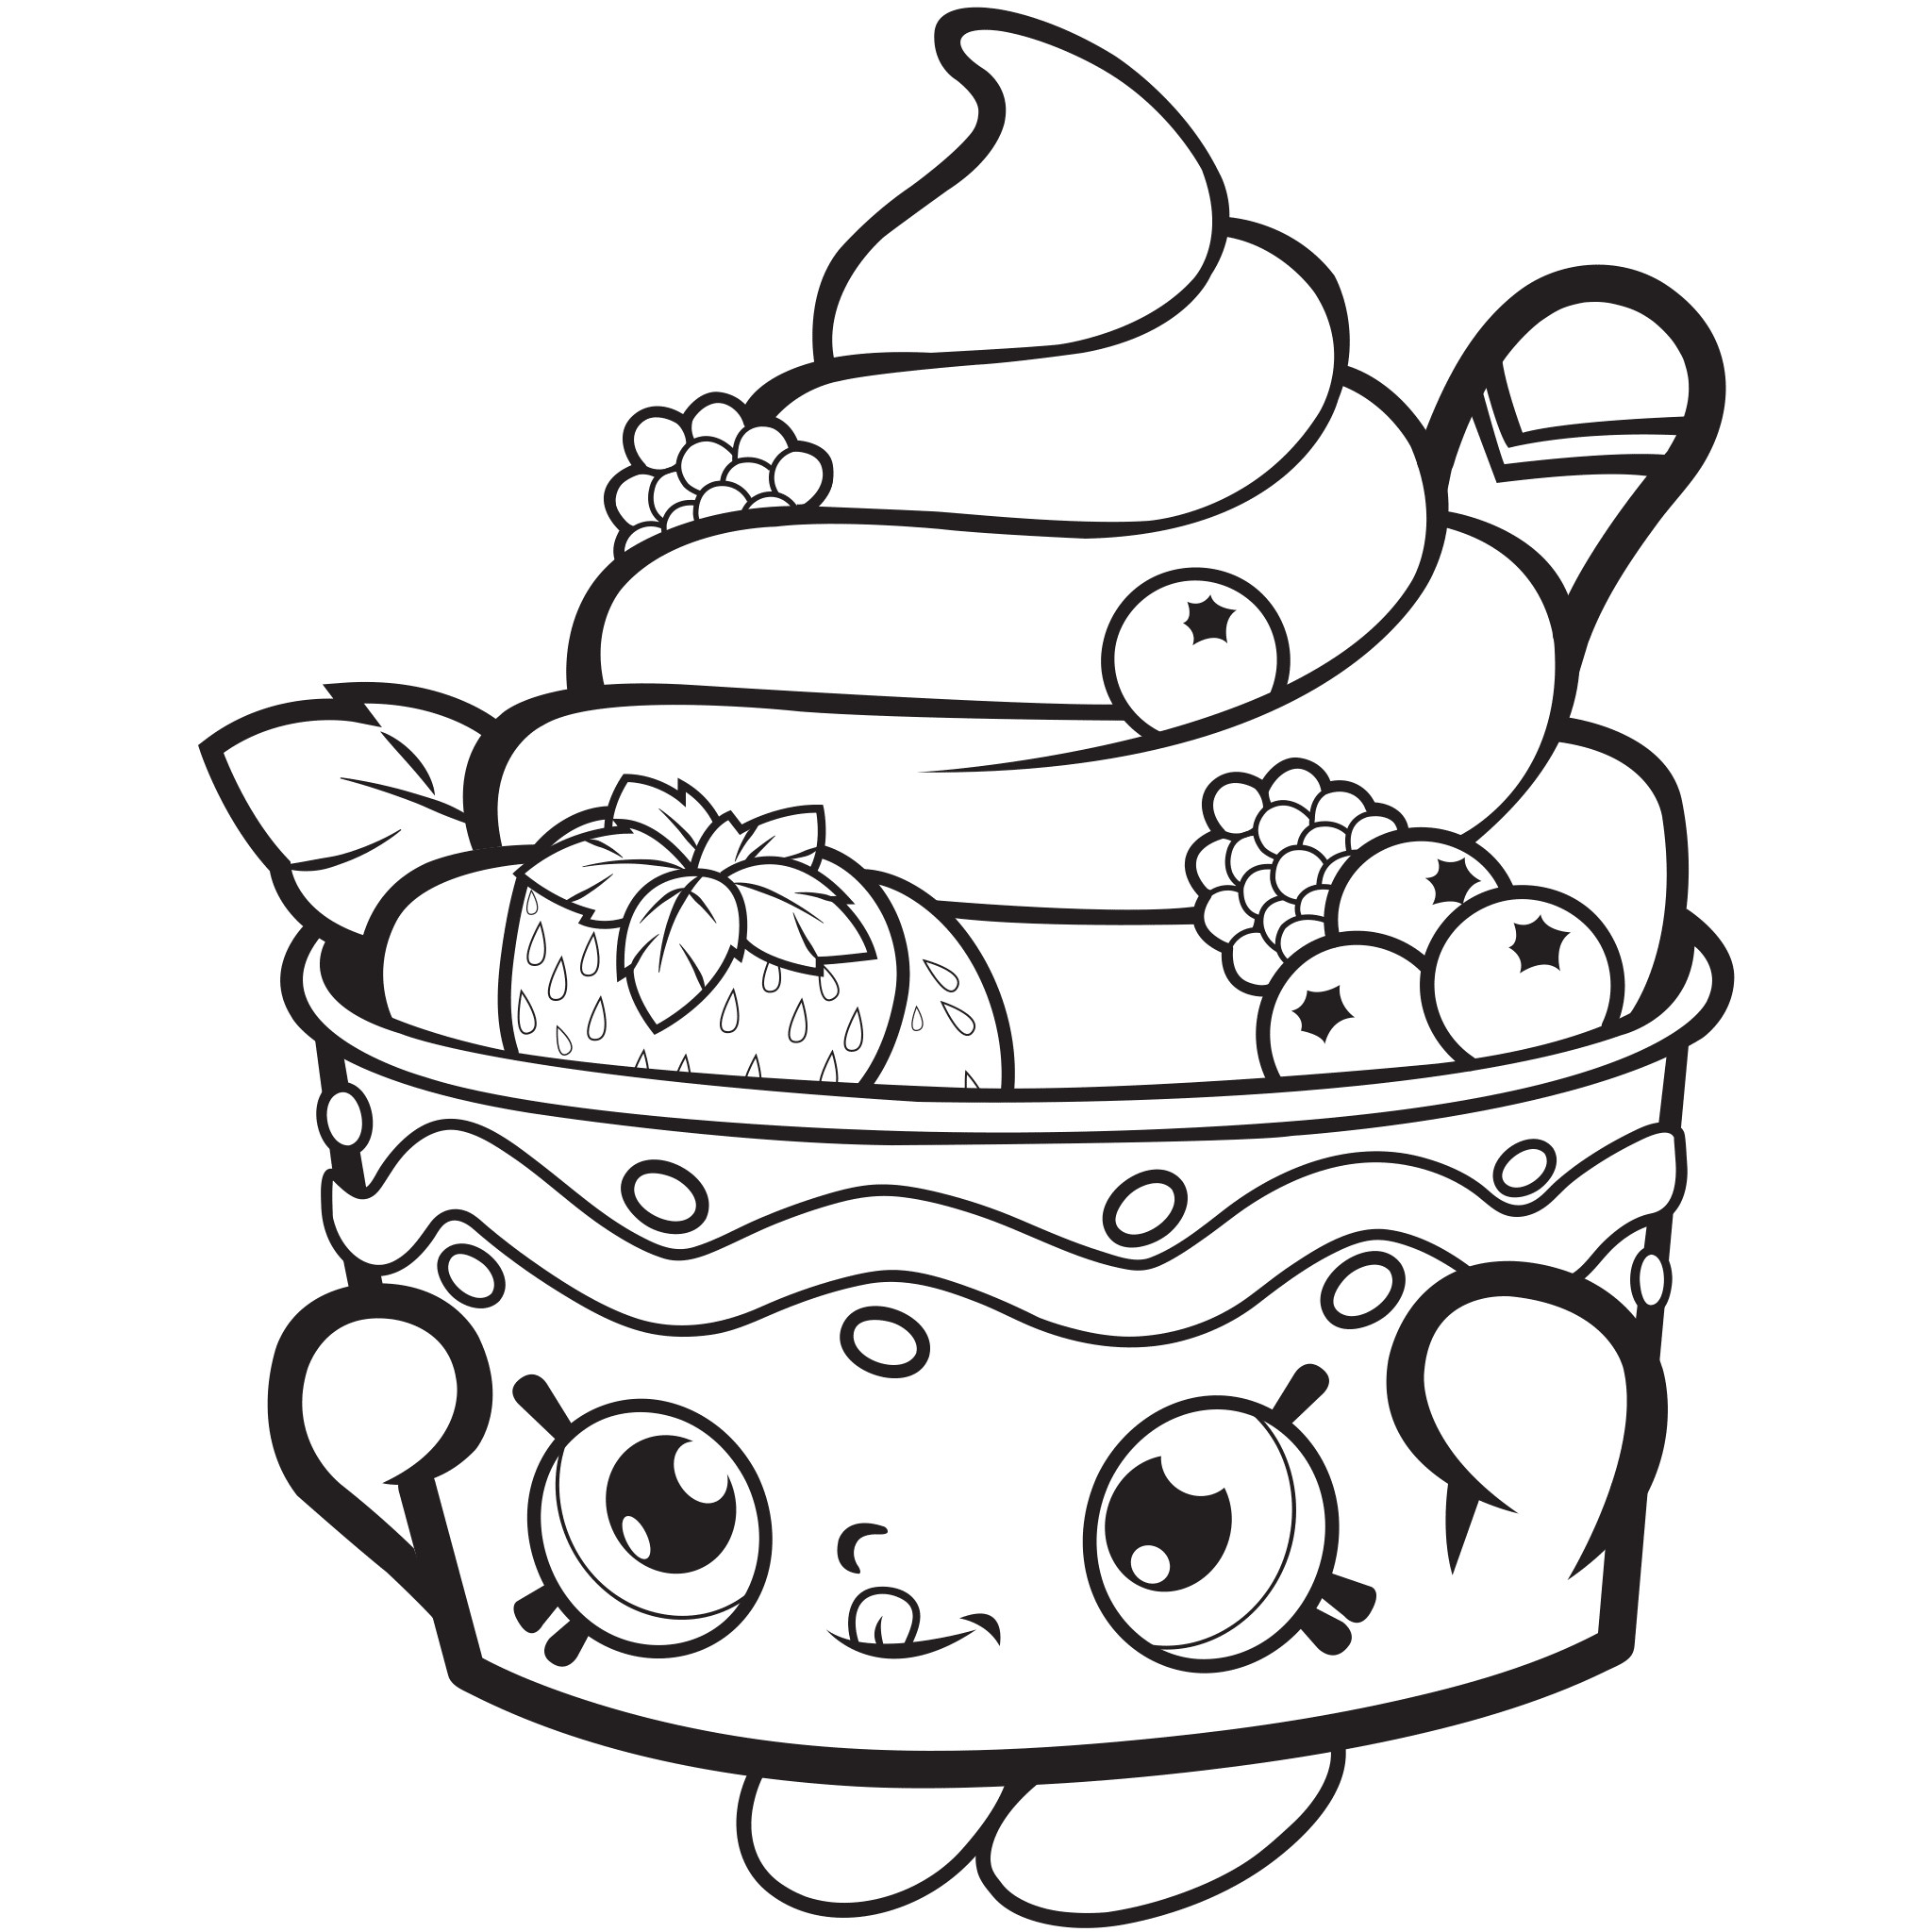 Shopkins Coloring Pages Cheeky Chocolate at GetColorings.com | Free